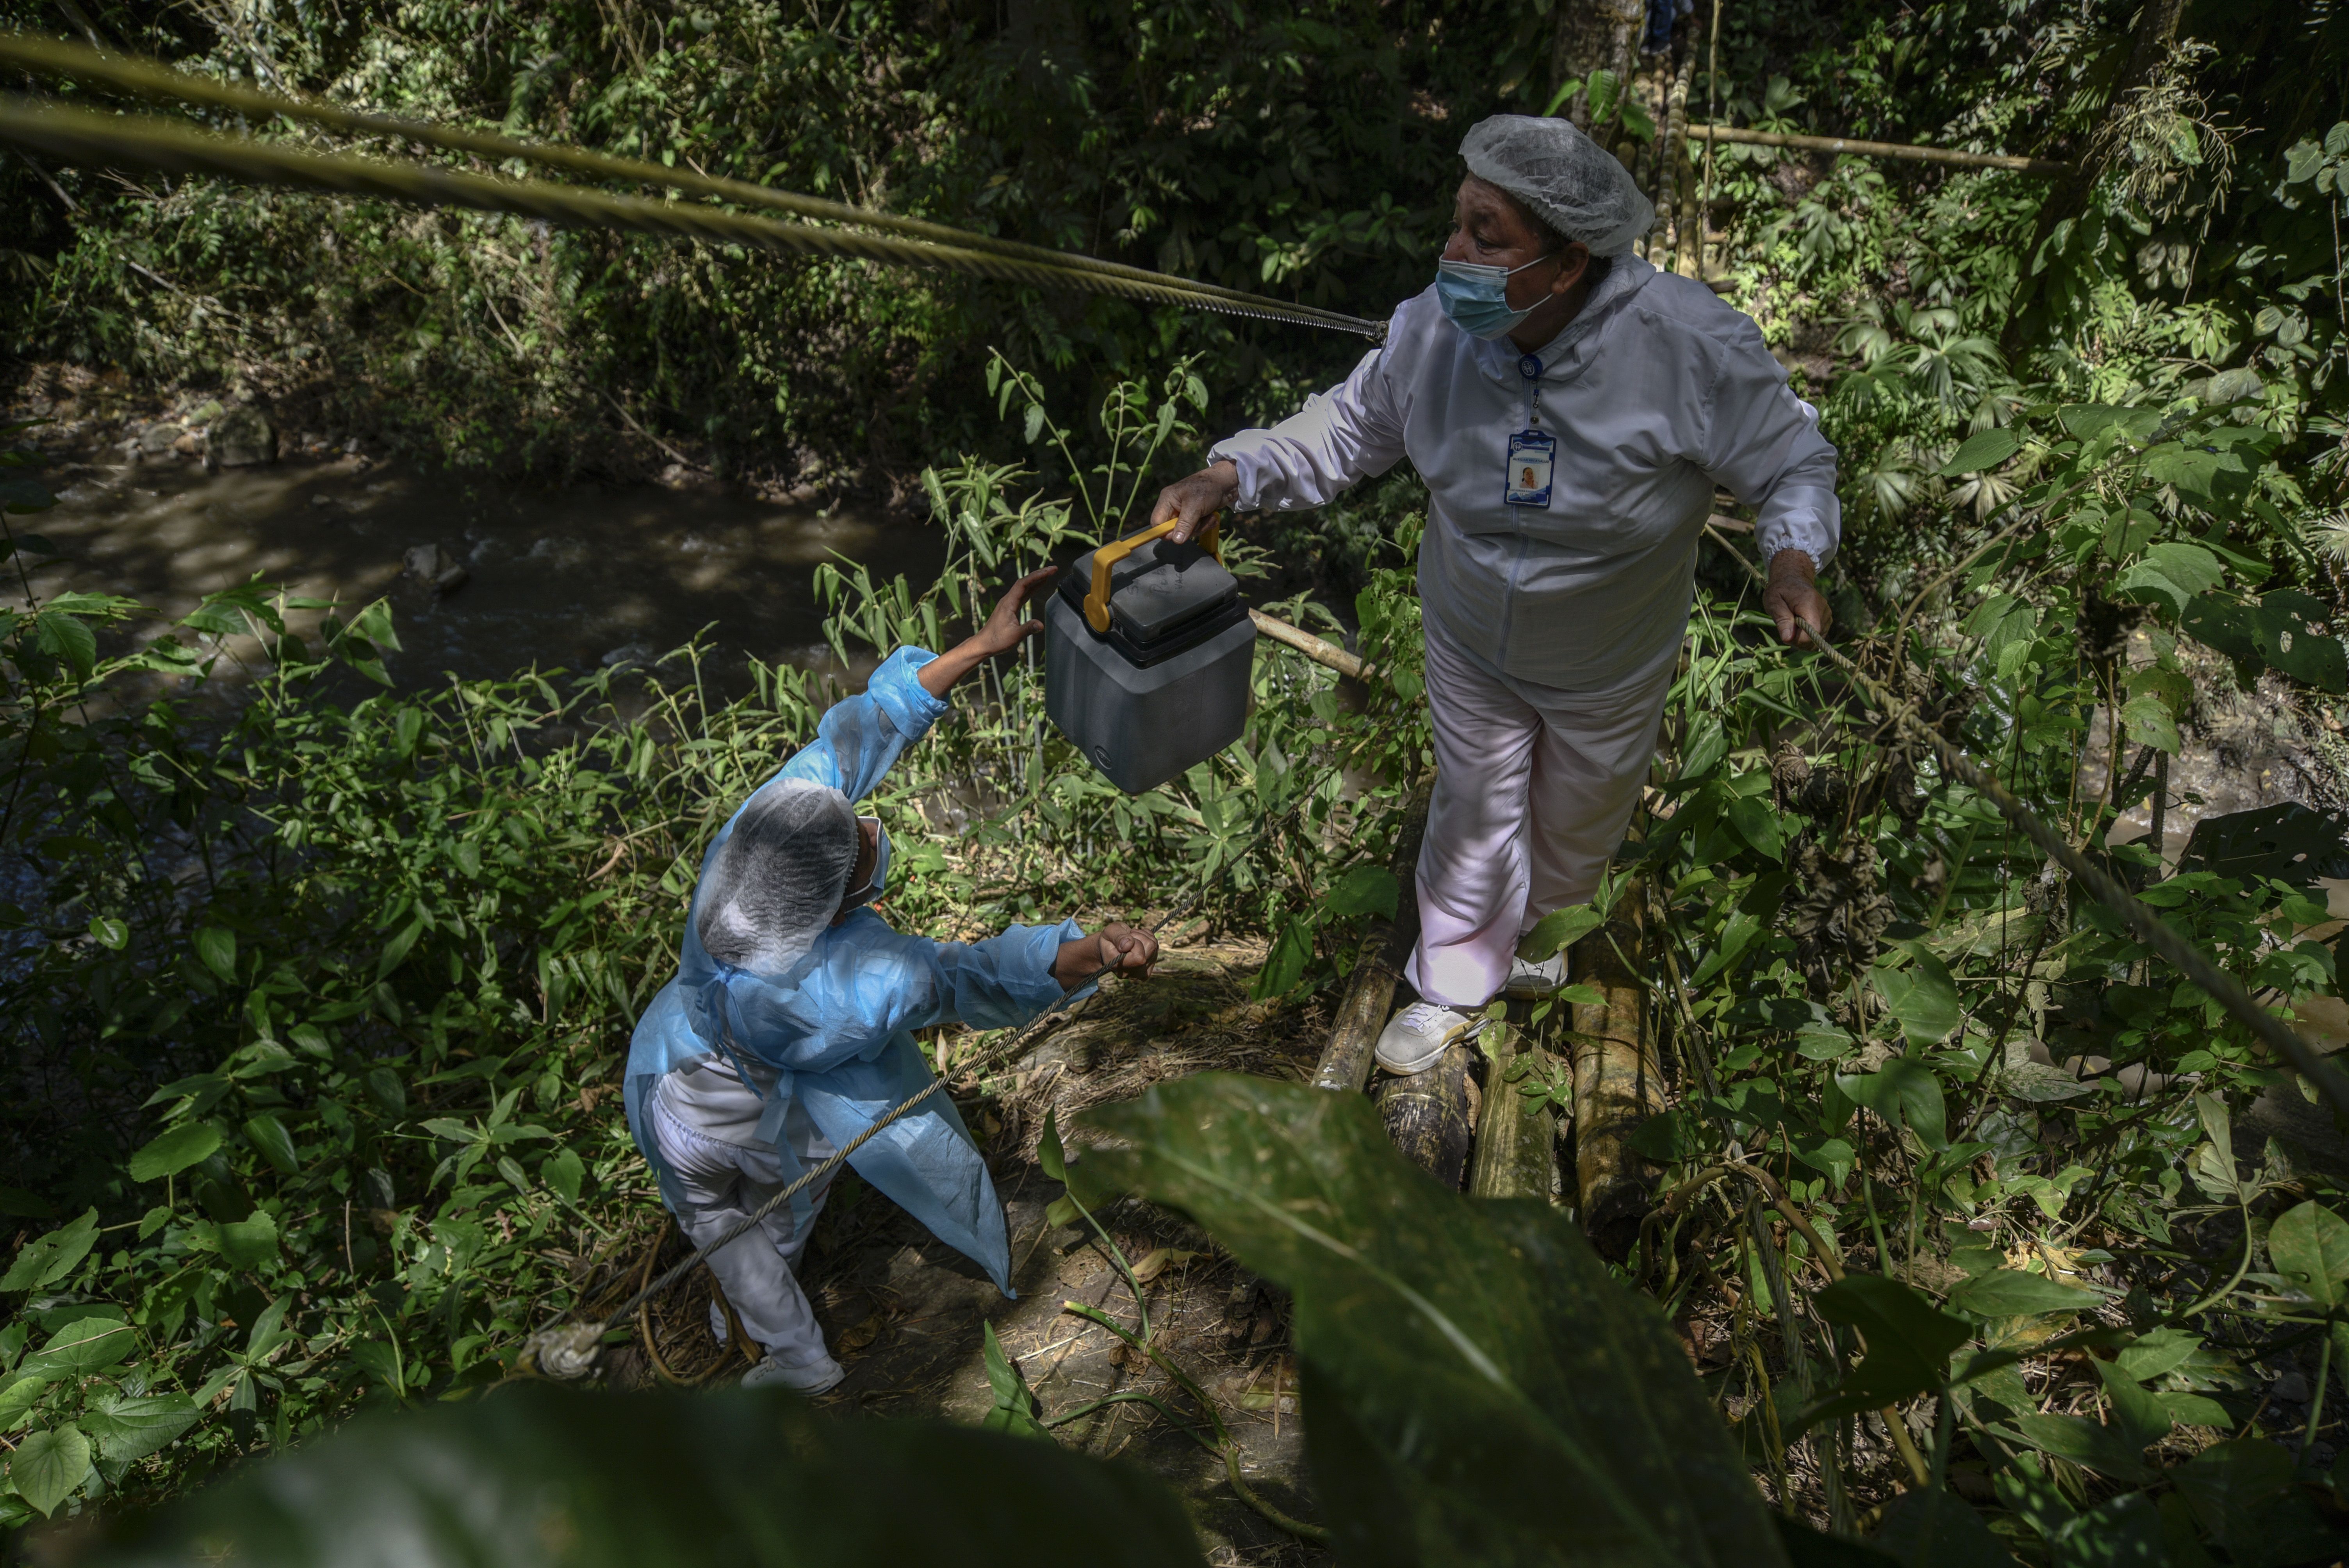 Health care workers cross a cane bridge in Colombia to administer a COVID vaccine to a rural resident.